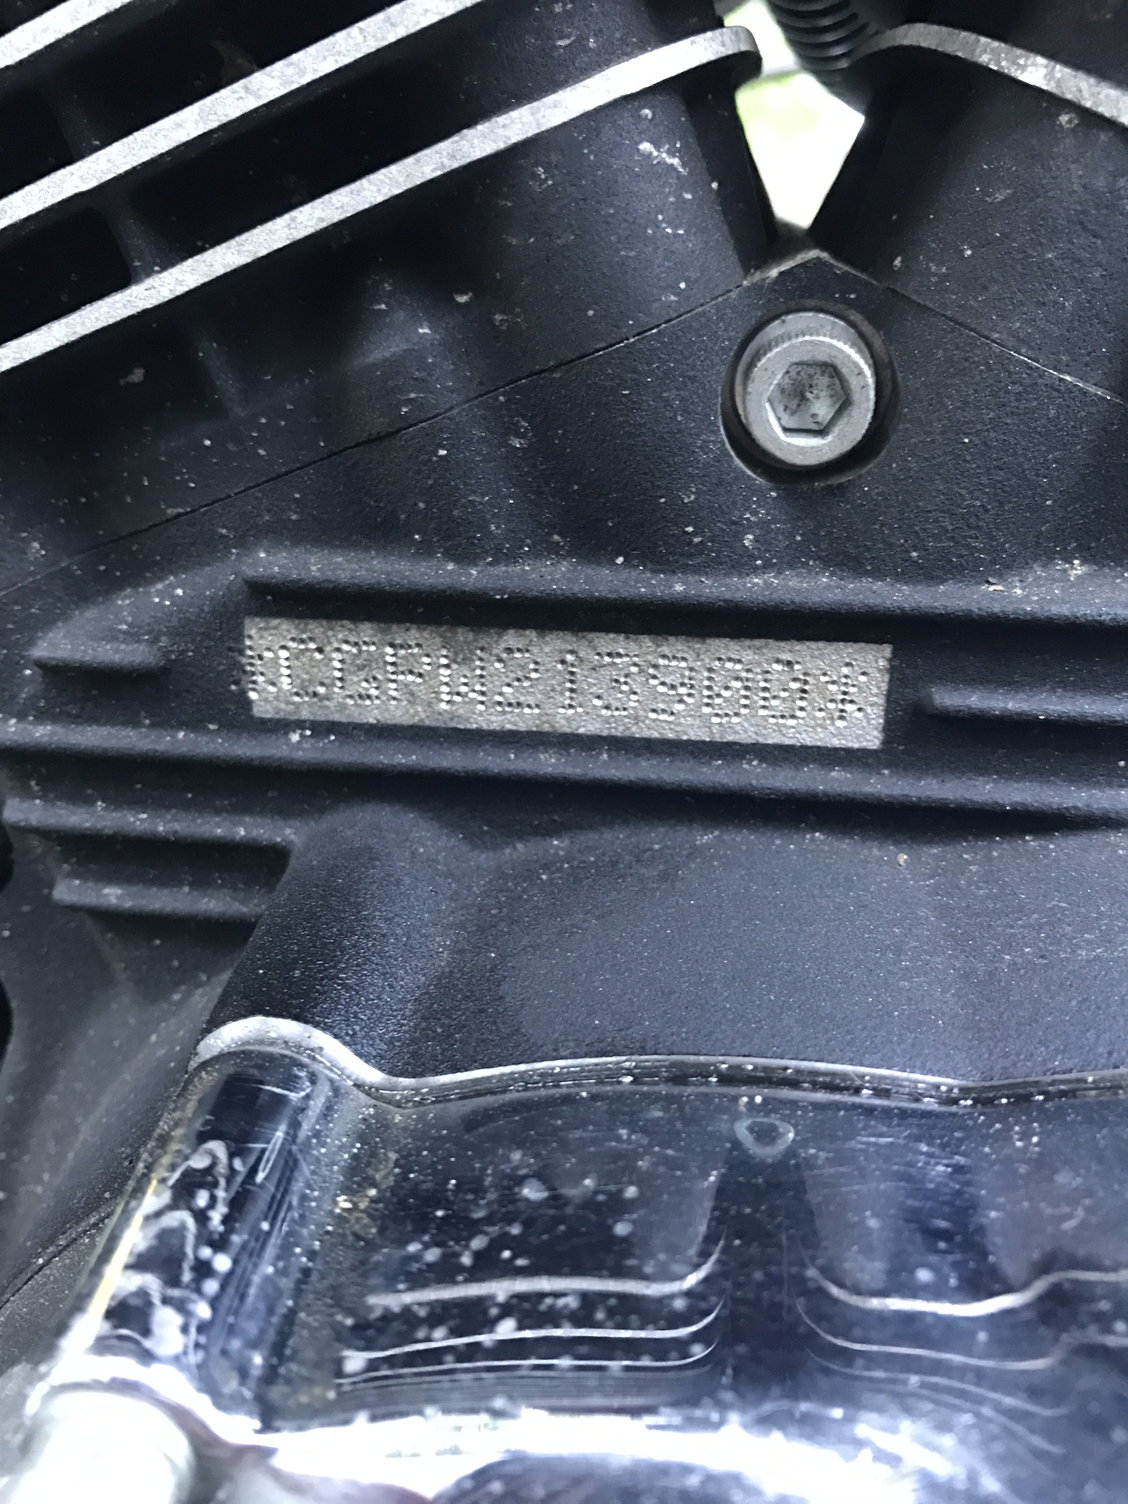 Identifying Engine Year And Size From Engine Case Number Harley Davidson Forums